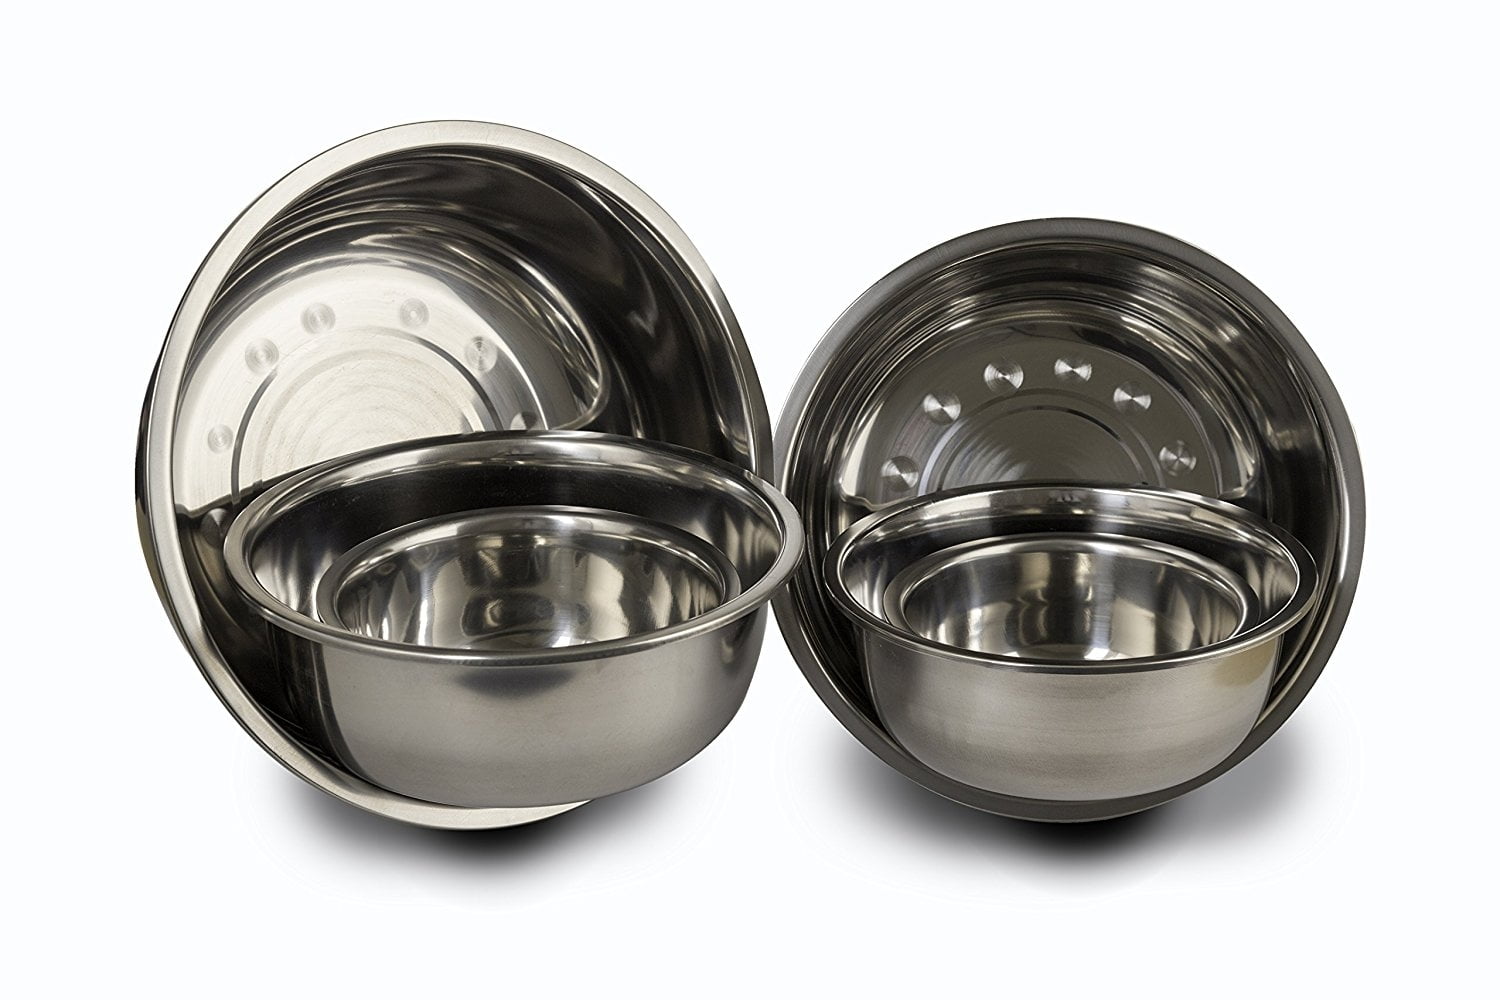 TINANA Mixing Bowls Set, Set of 6, Stainless Steel Mixing Bowls, Metal  Nesting Storage Bowls for Kitchen, Size 8, 5, 4, 3, 1.5, 0.75 QT, Great for  Prep, Baking, Serving-Gray 